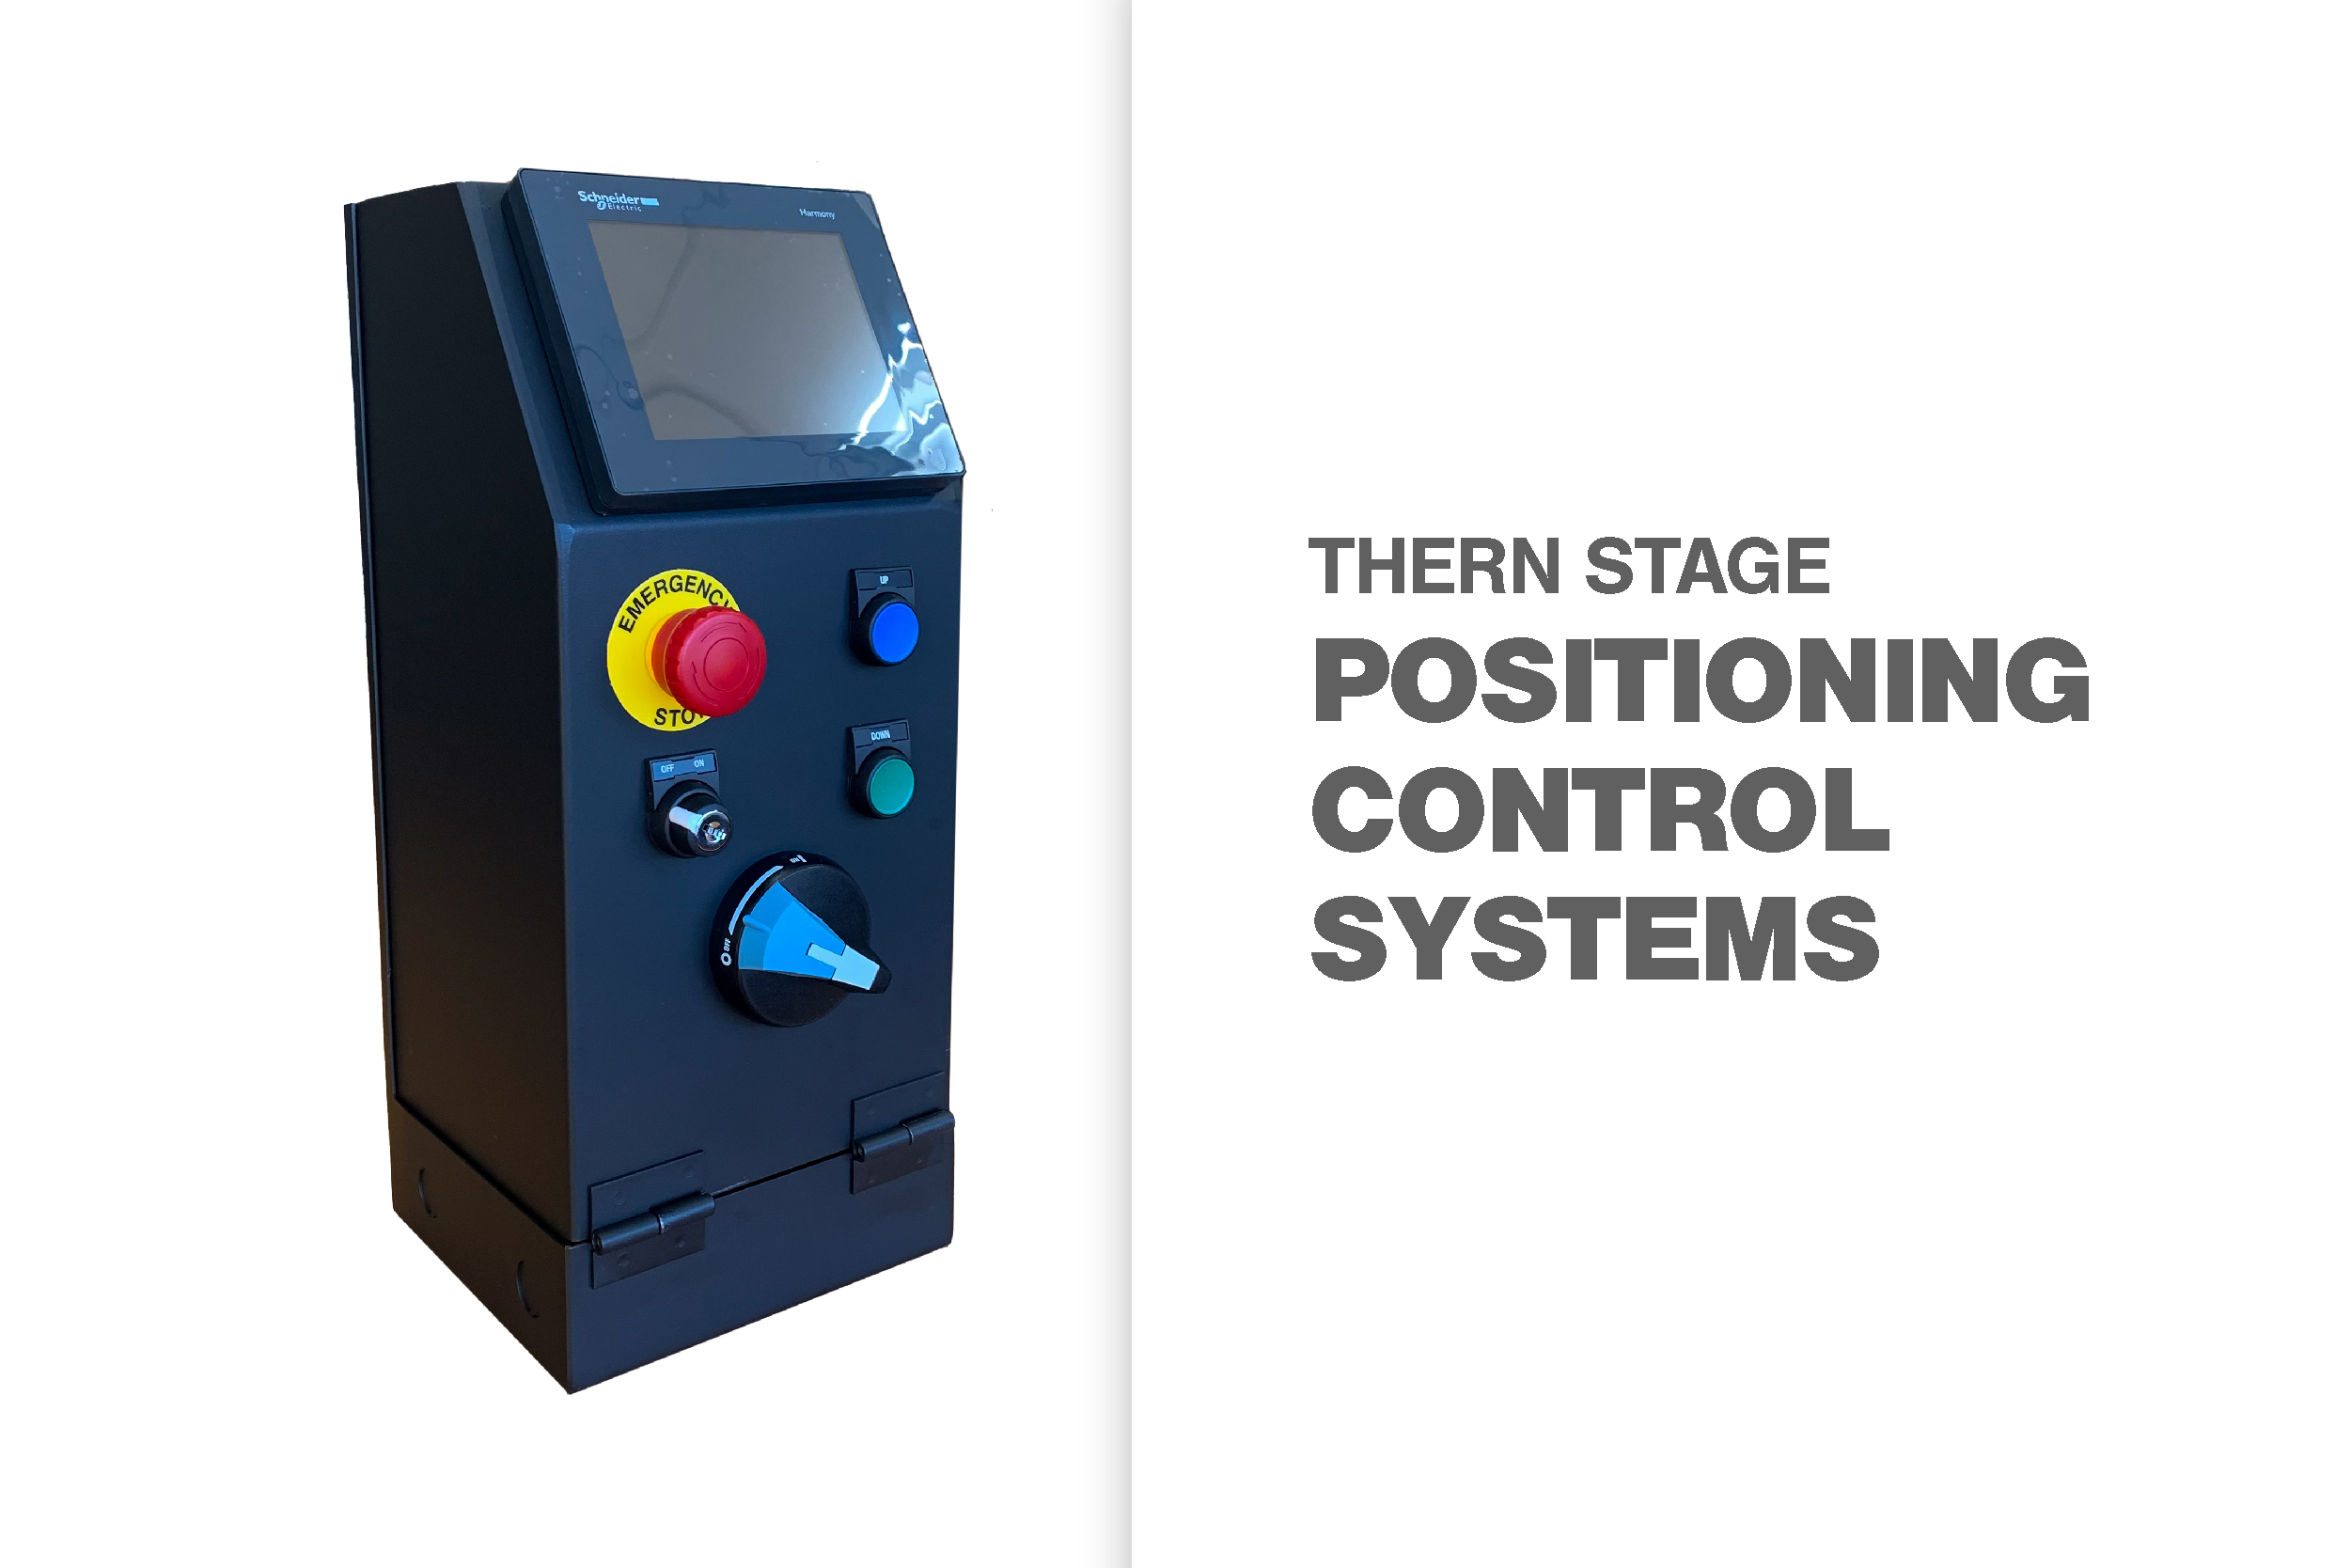 Thern Stage - Positioning Control Systems